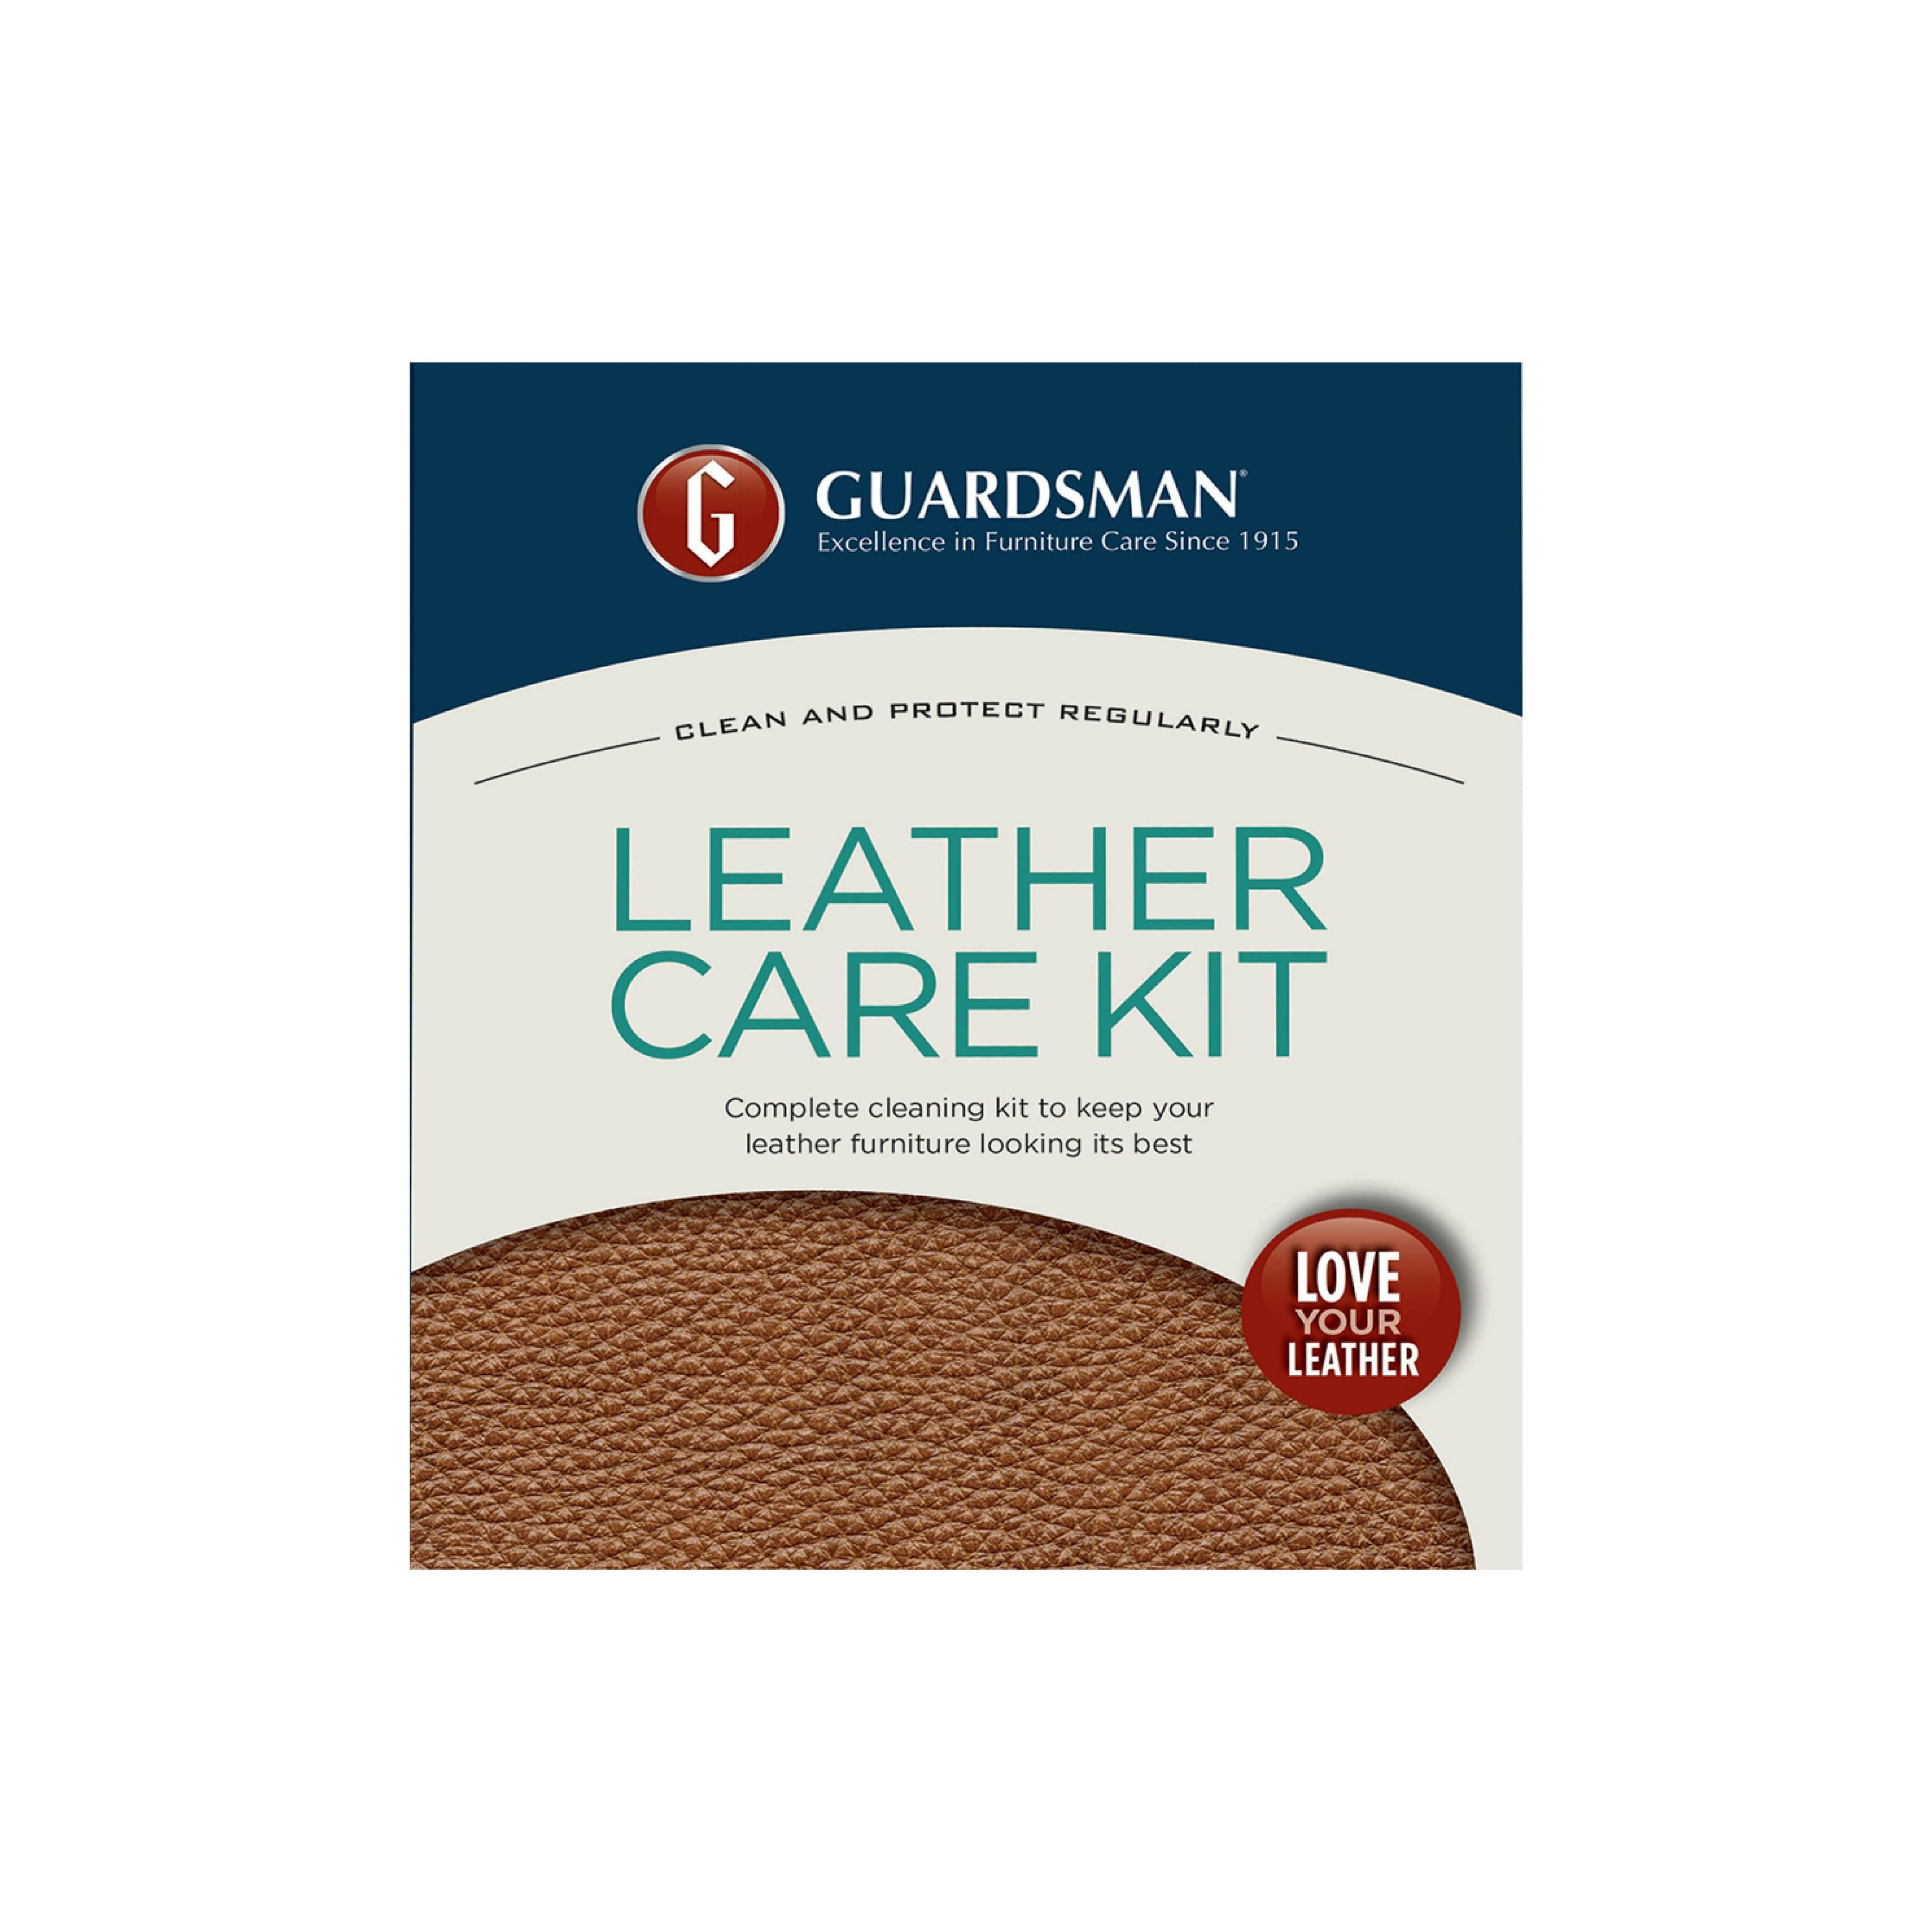 Guardsman Leather Care Kit | Leather Care & Clean | Brilliant Home Living